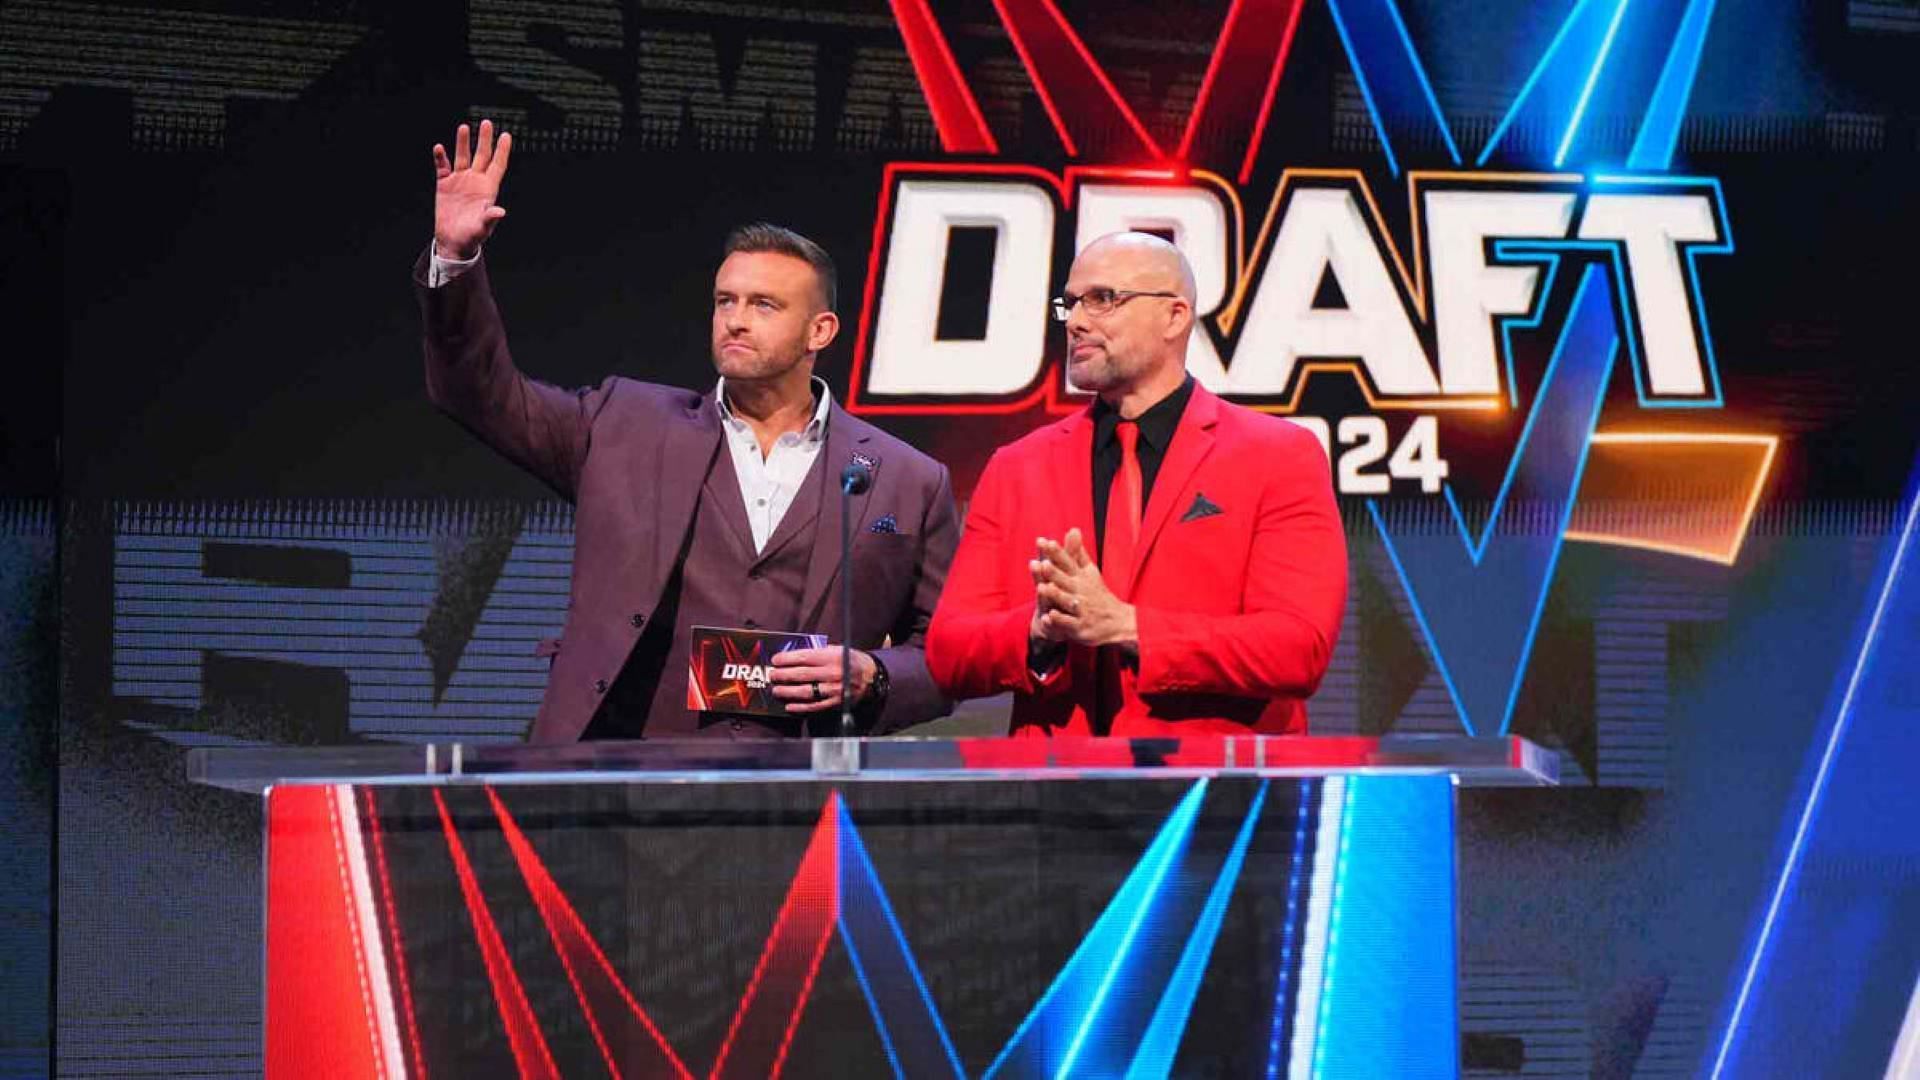 What trades could Nick Aldis and Adam Pearce agree to before rosters lock?